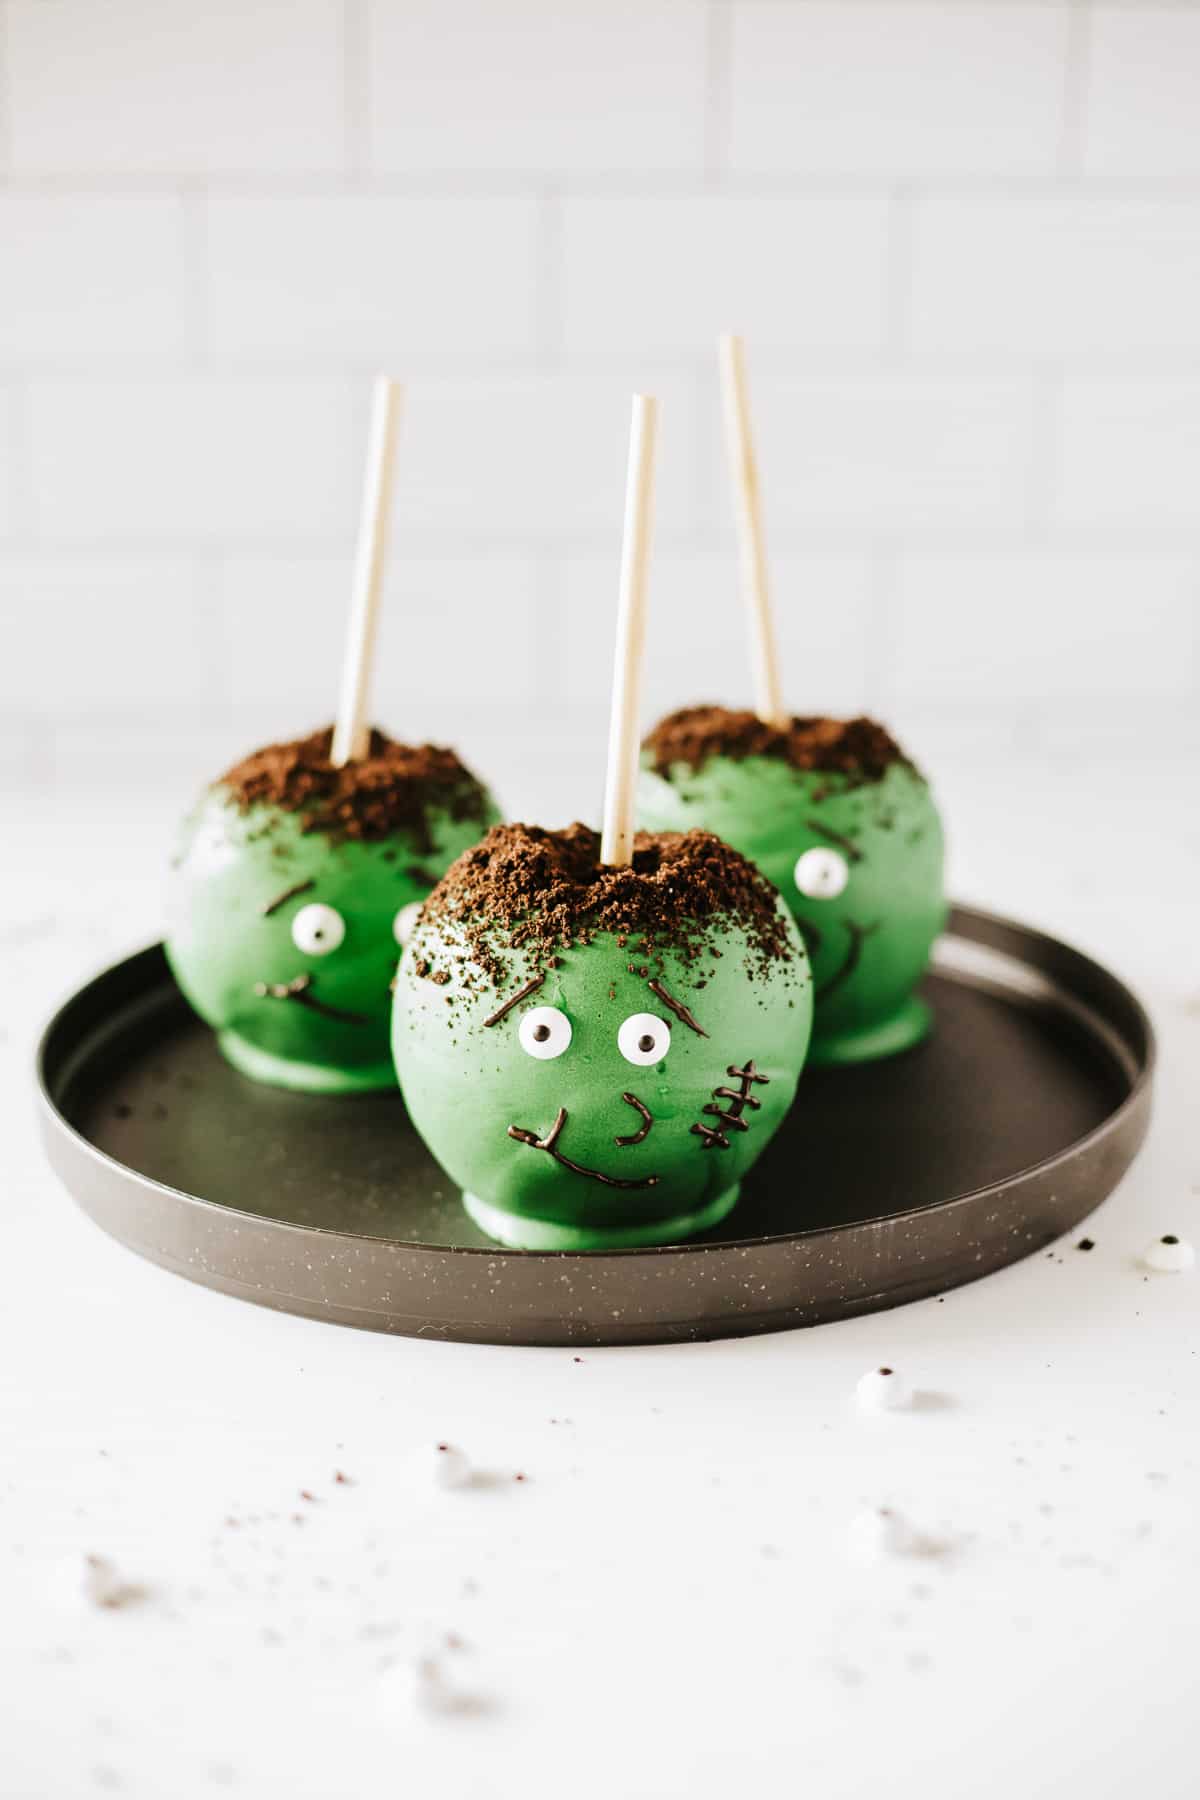 Three Frankenstein candy apples on a black plate over a white background.